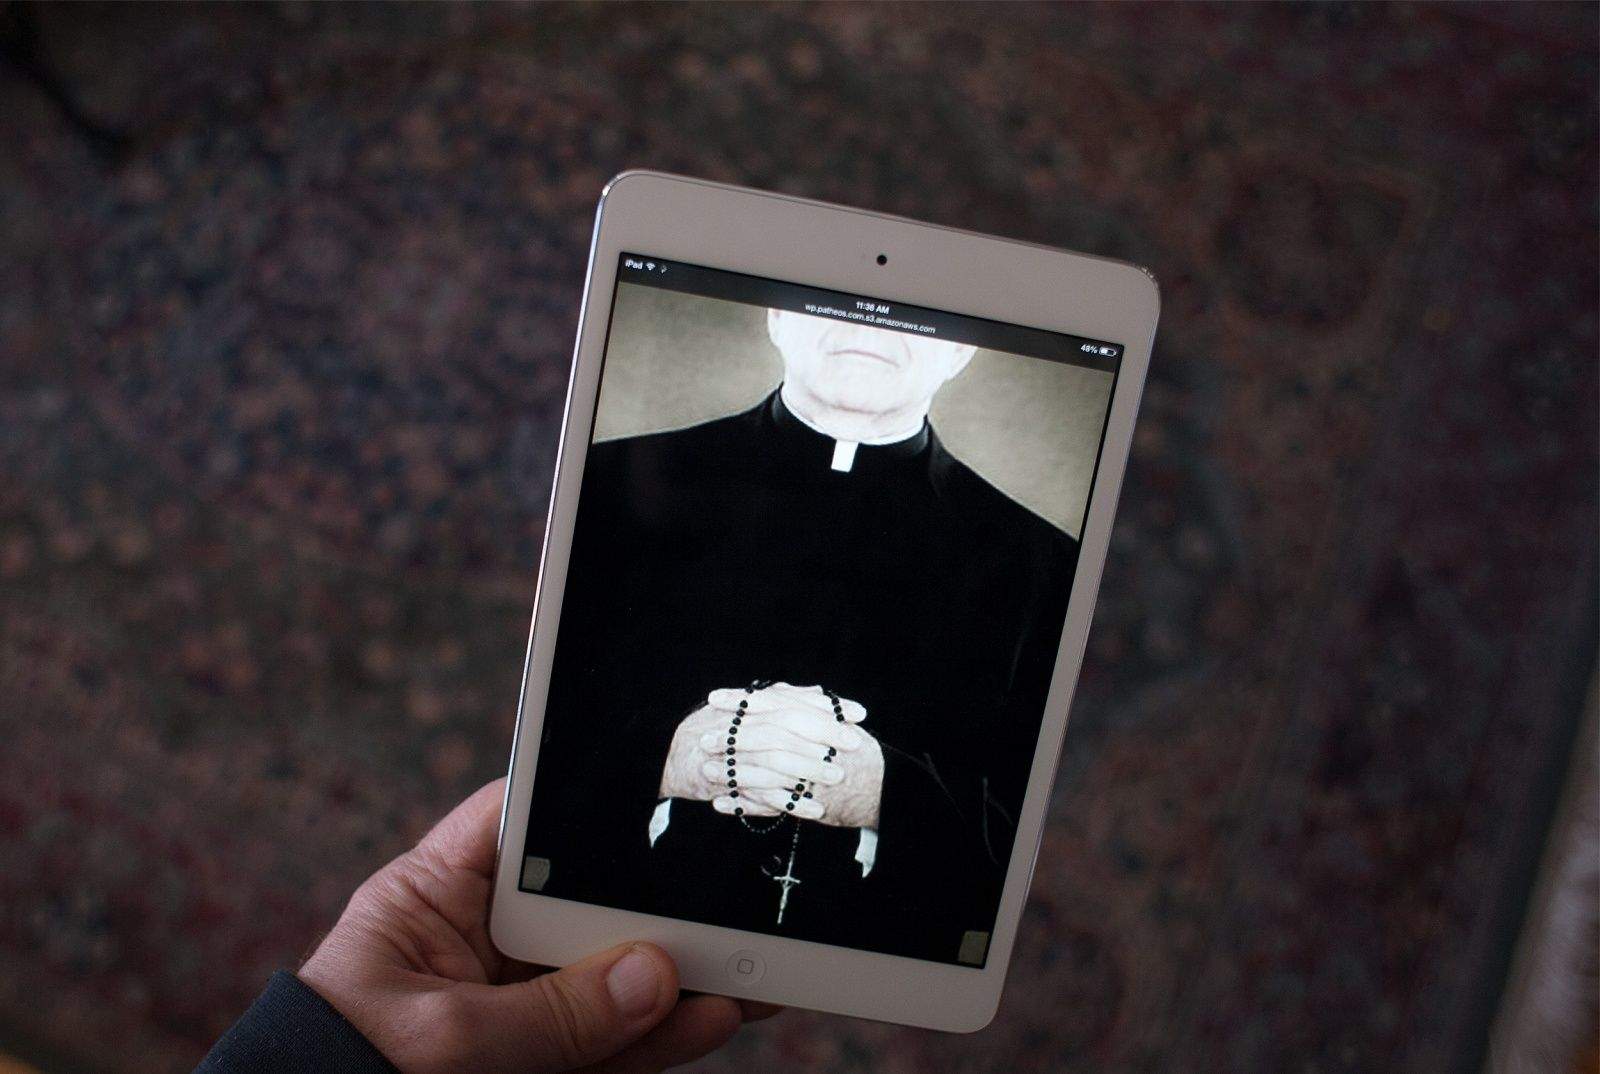 A Texas man claiming to be a priest will take confession over Snapchat now through March 16. Photo illustration: David Pierini/Cult of Mac